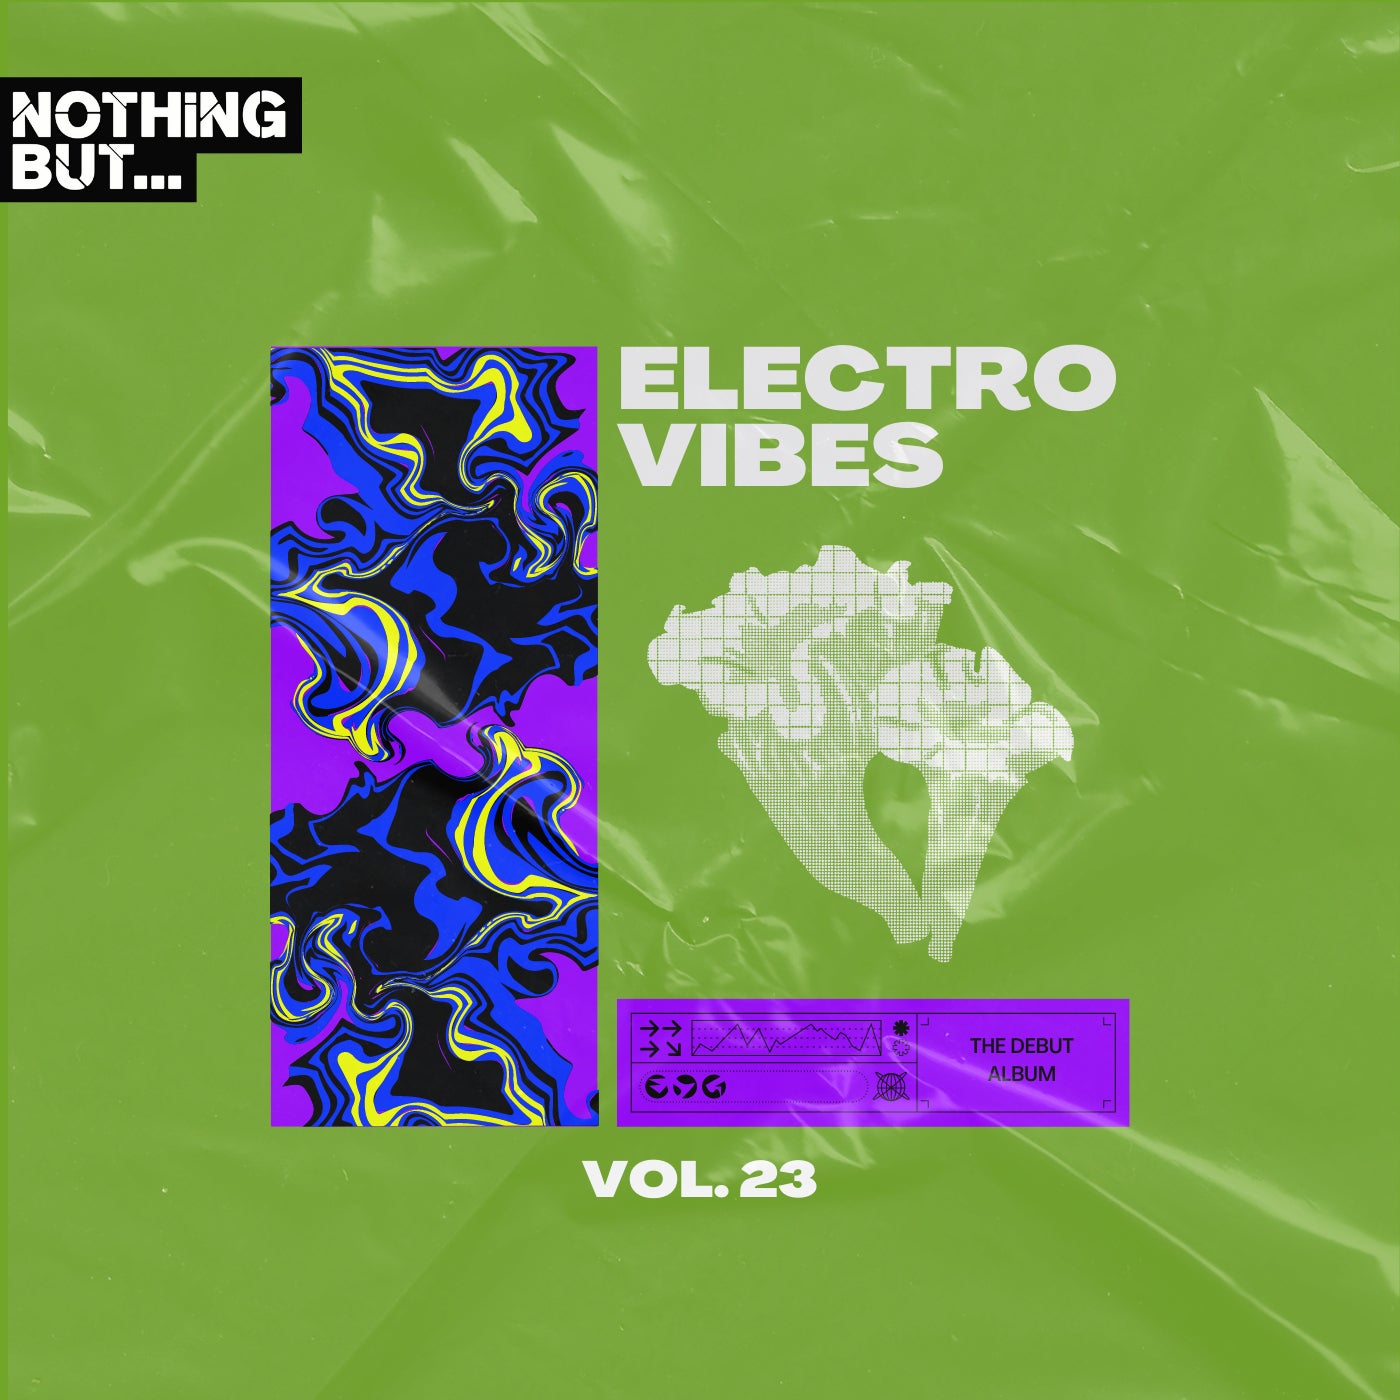 Nothing But... Electro Vibes, Vol. 23